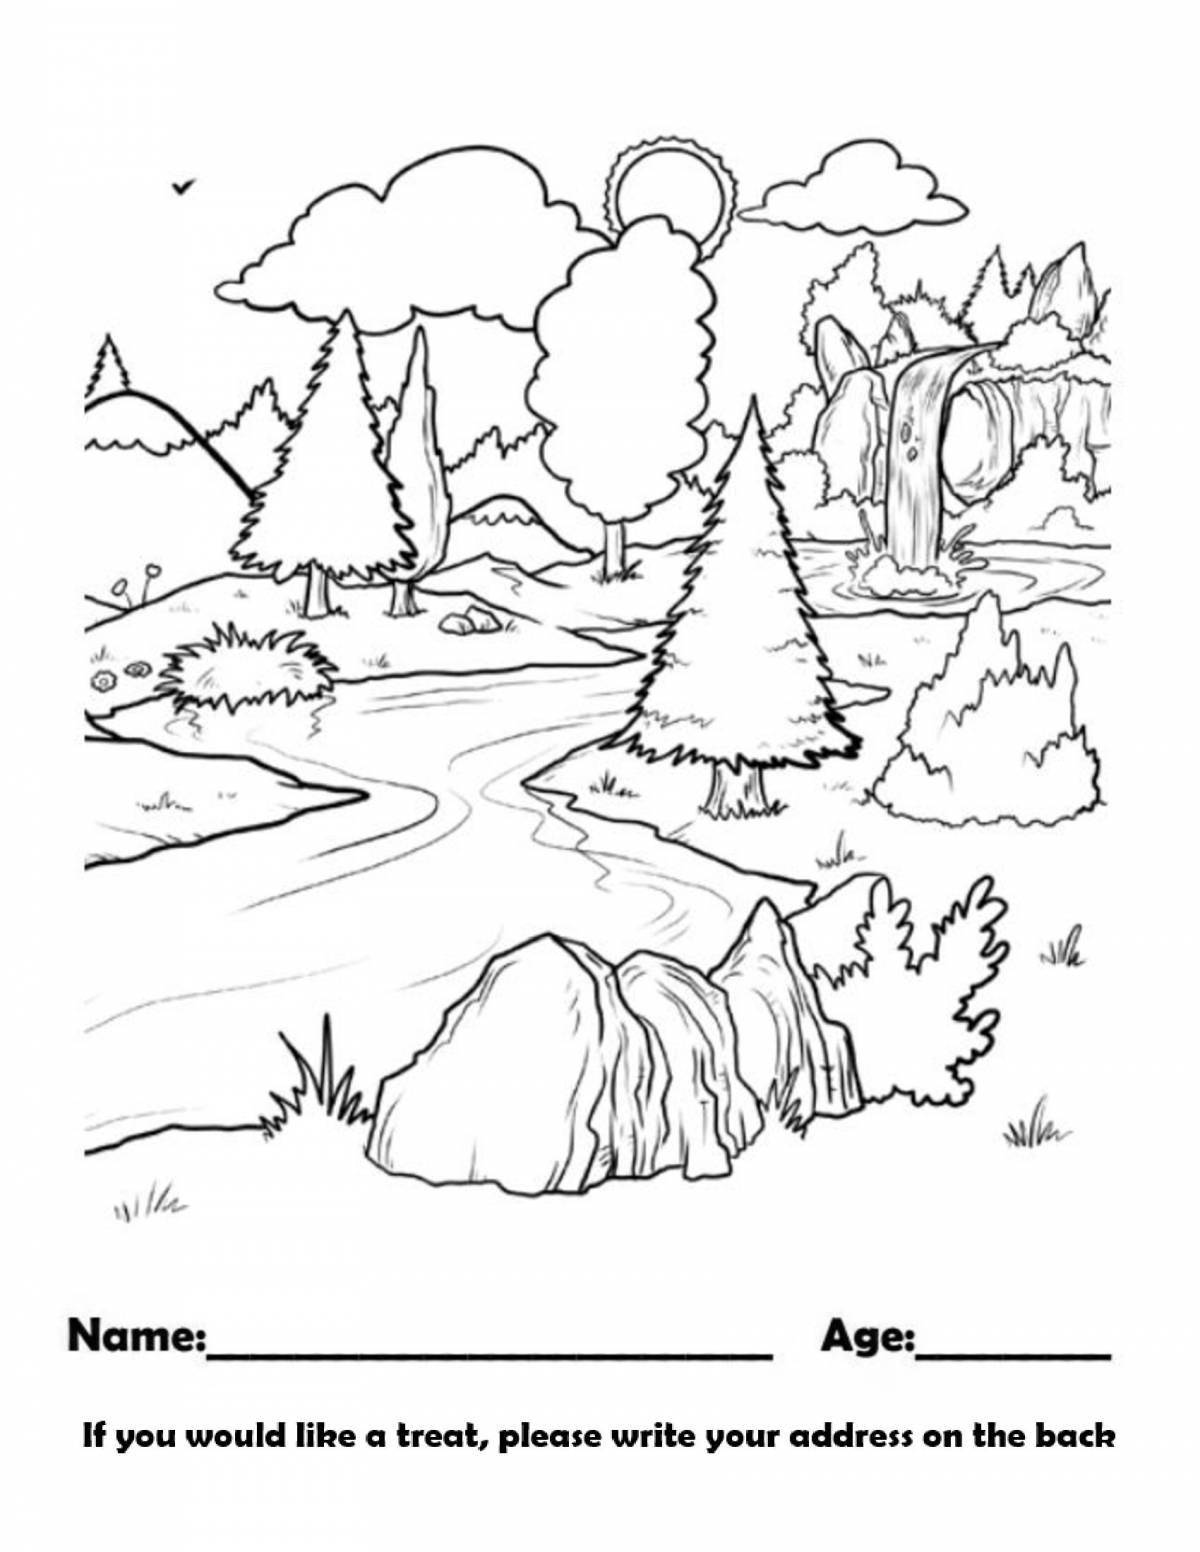 Fun coloring landscapes of nature for children